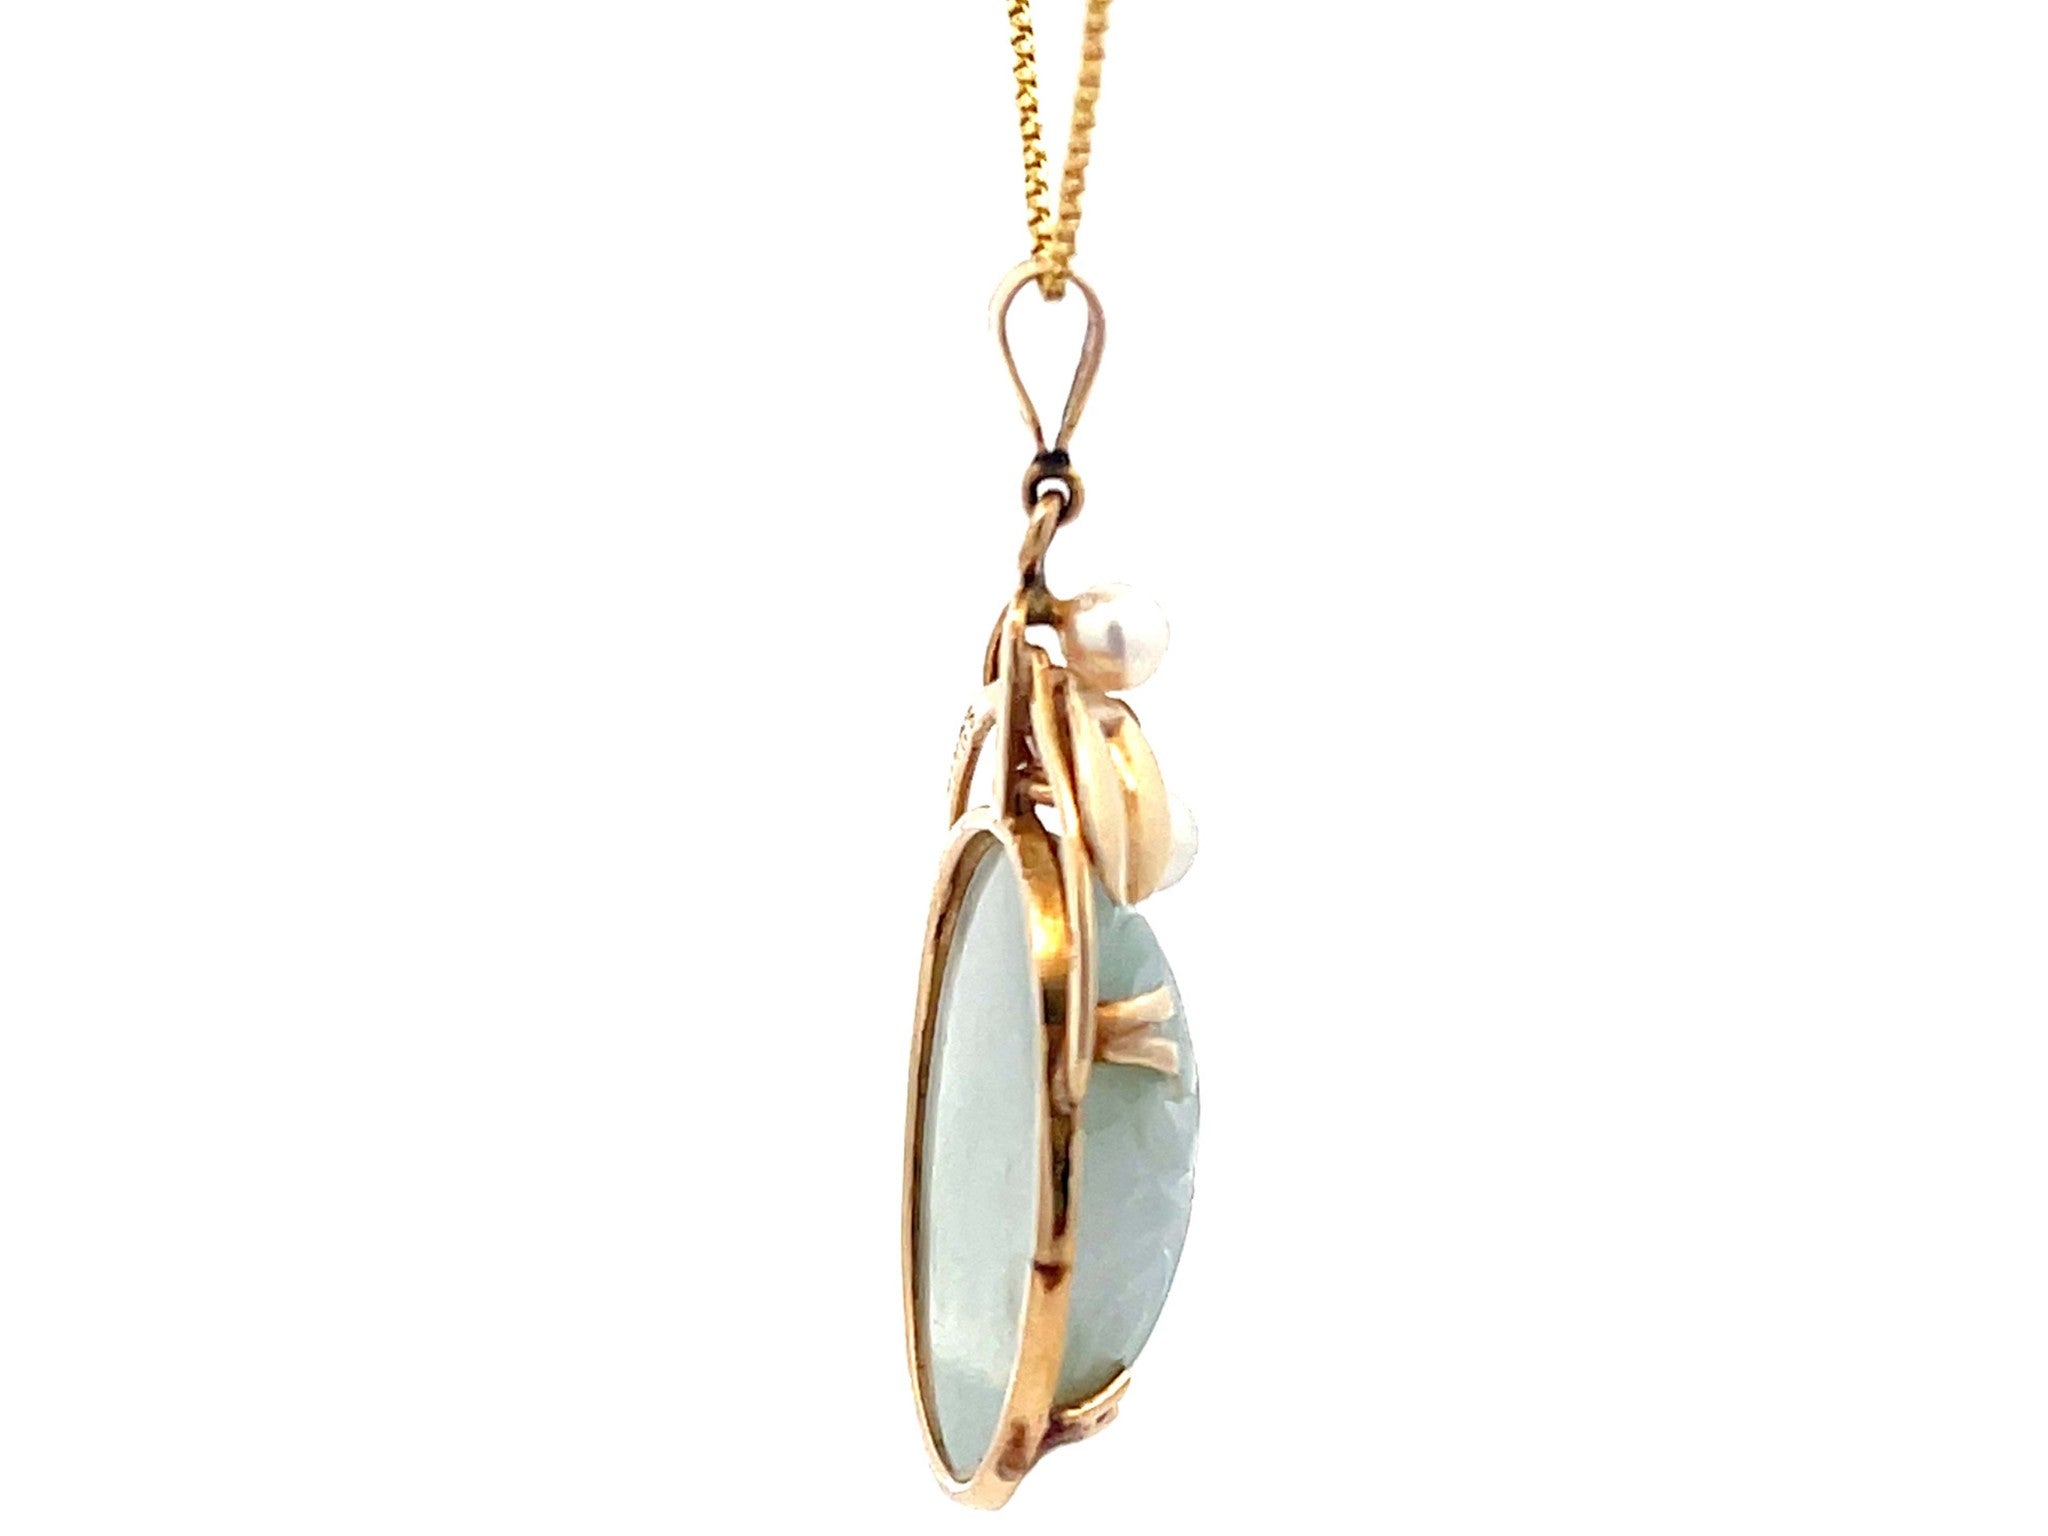 Mings Hawaii Carved Nephrite Jade & Pearl Pendant in 14k Yellow Gold with Chain